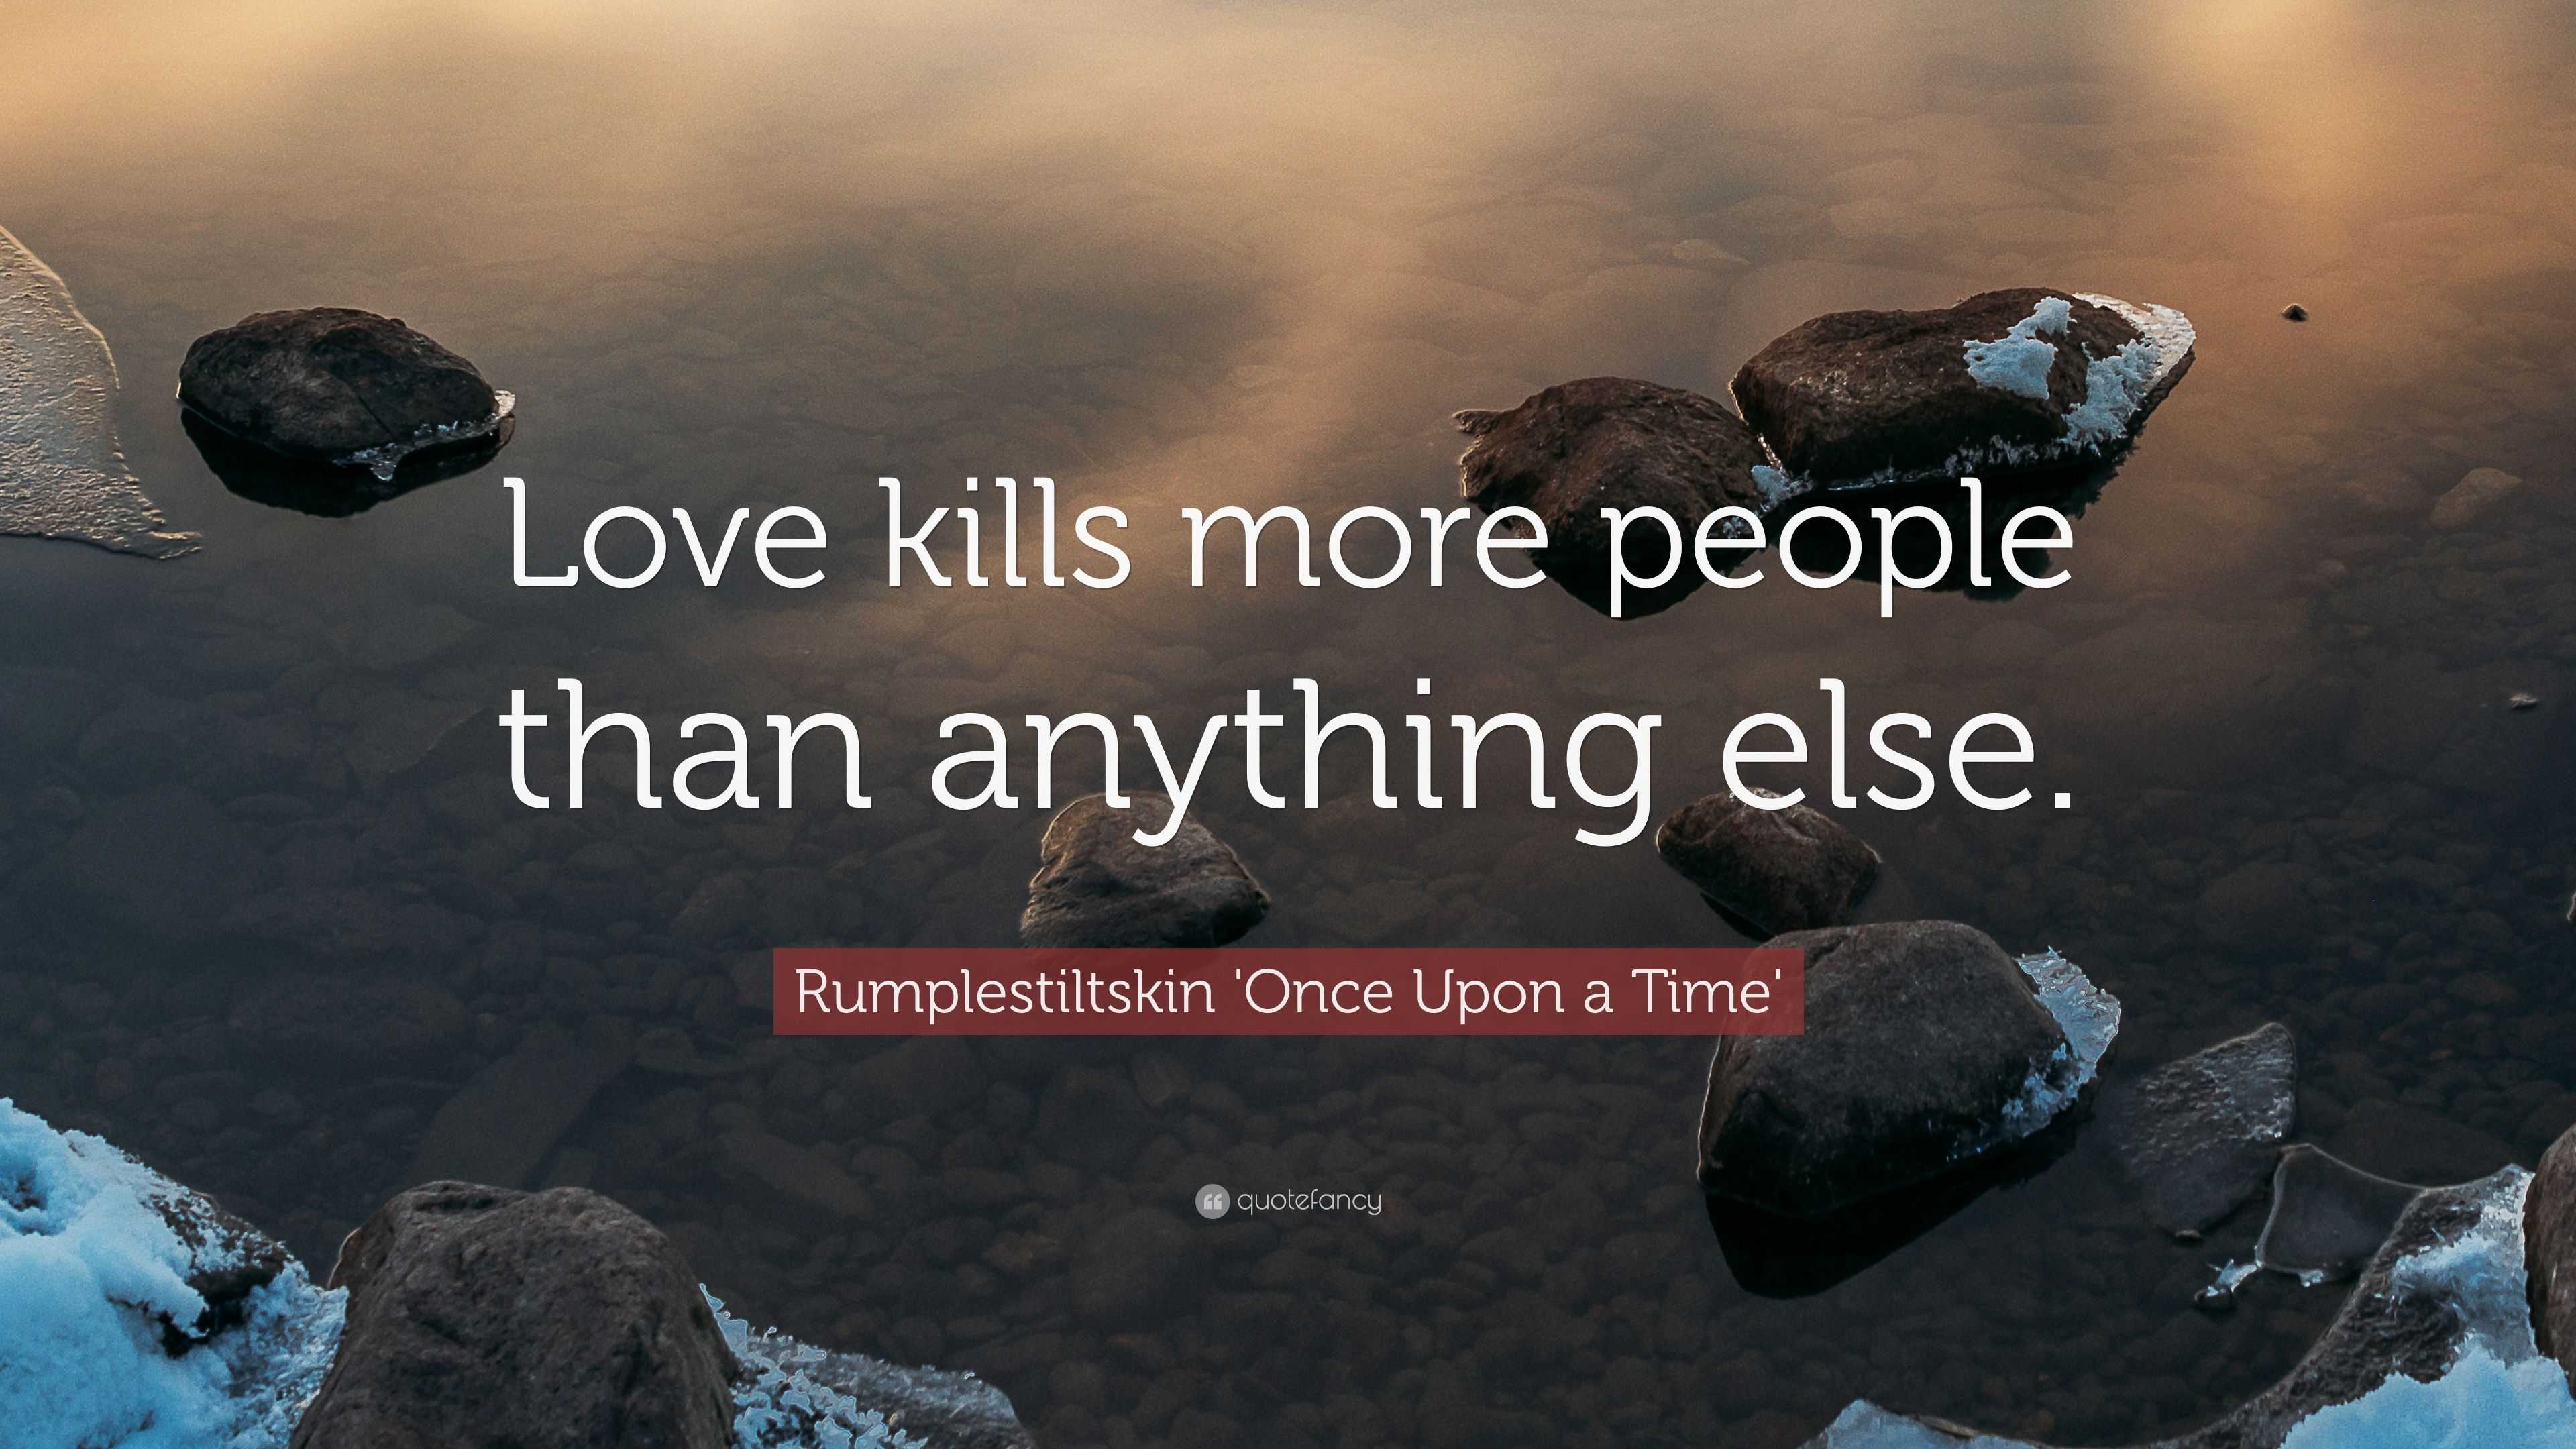 Rumplestiltskin ce Upon a Time Quote “Love kills more people than anything